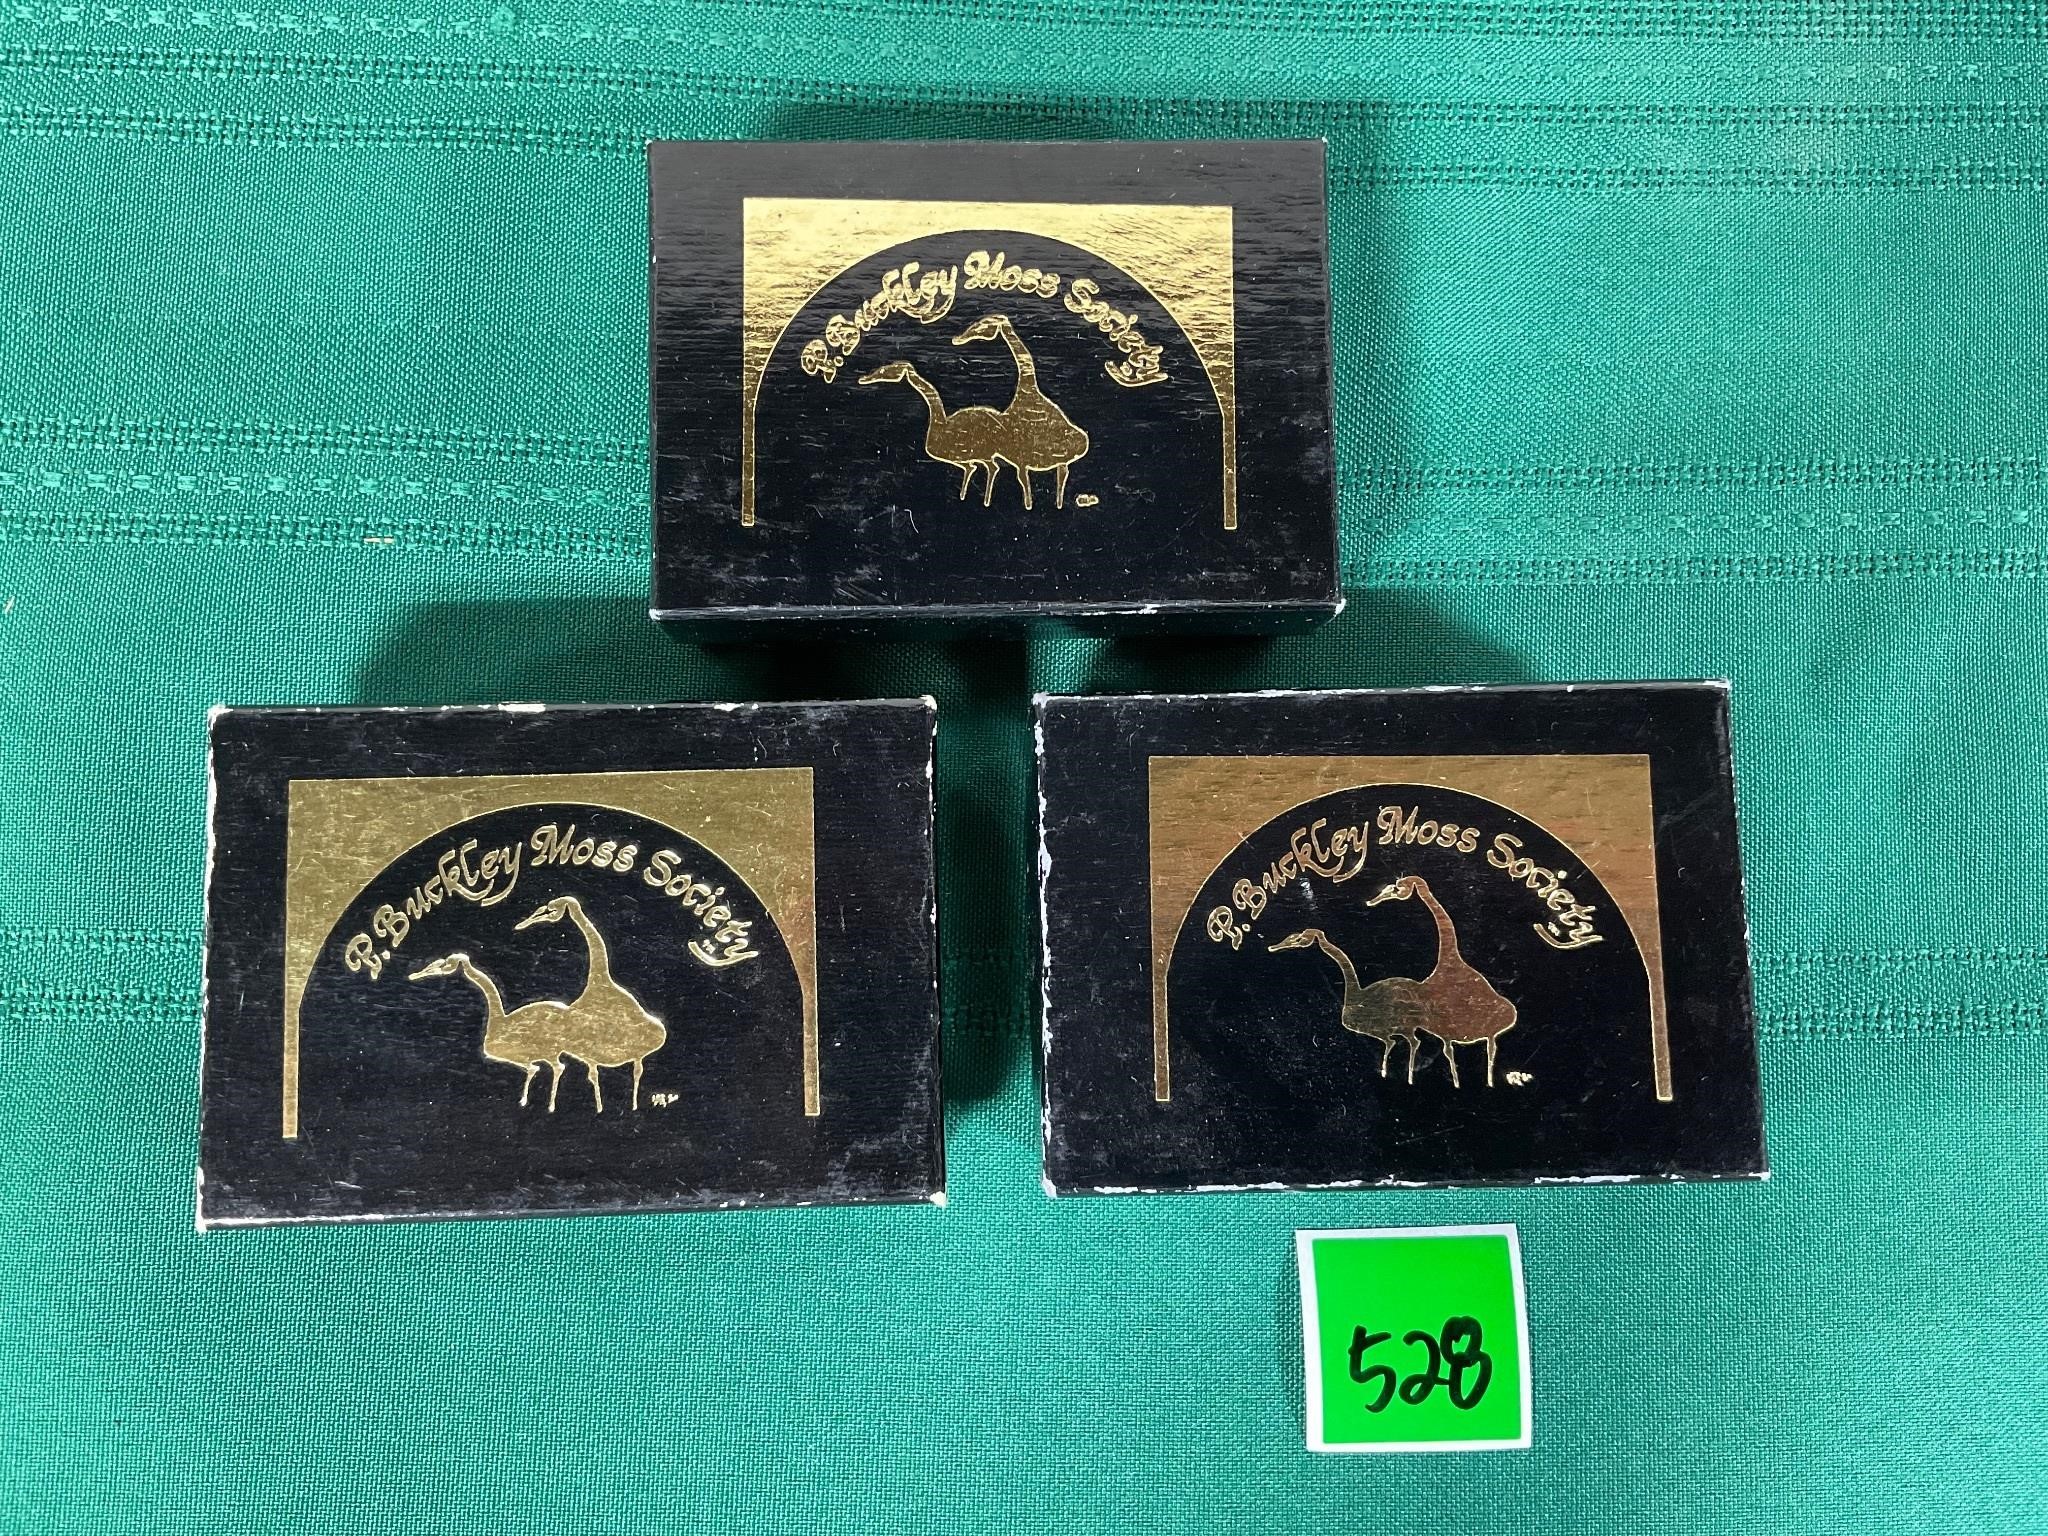 Collectible P.Buckley Moss Society Pins